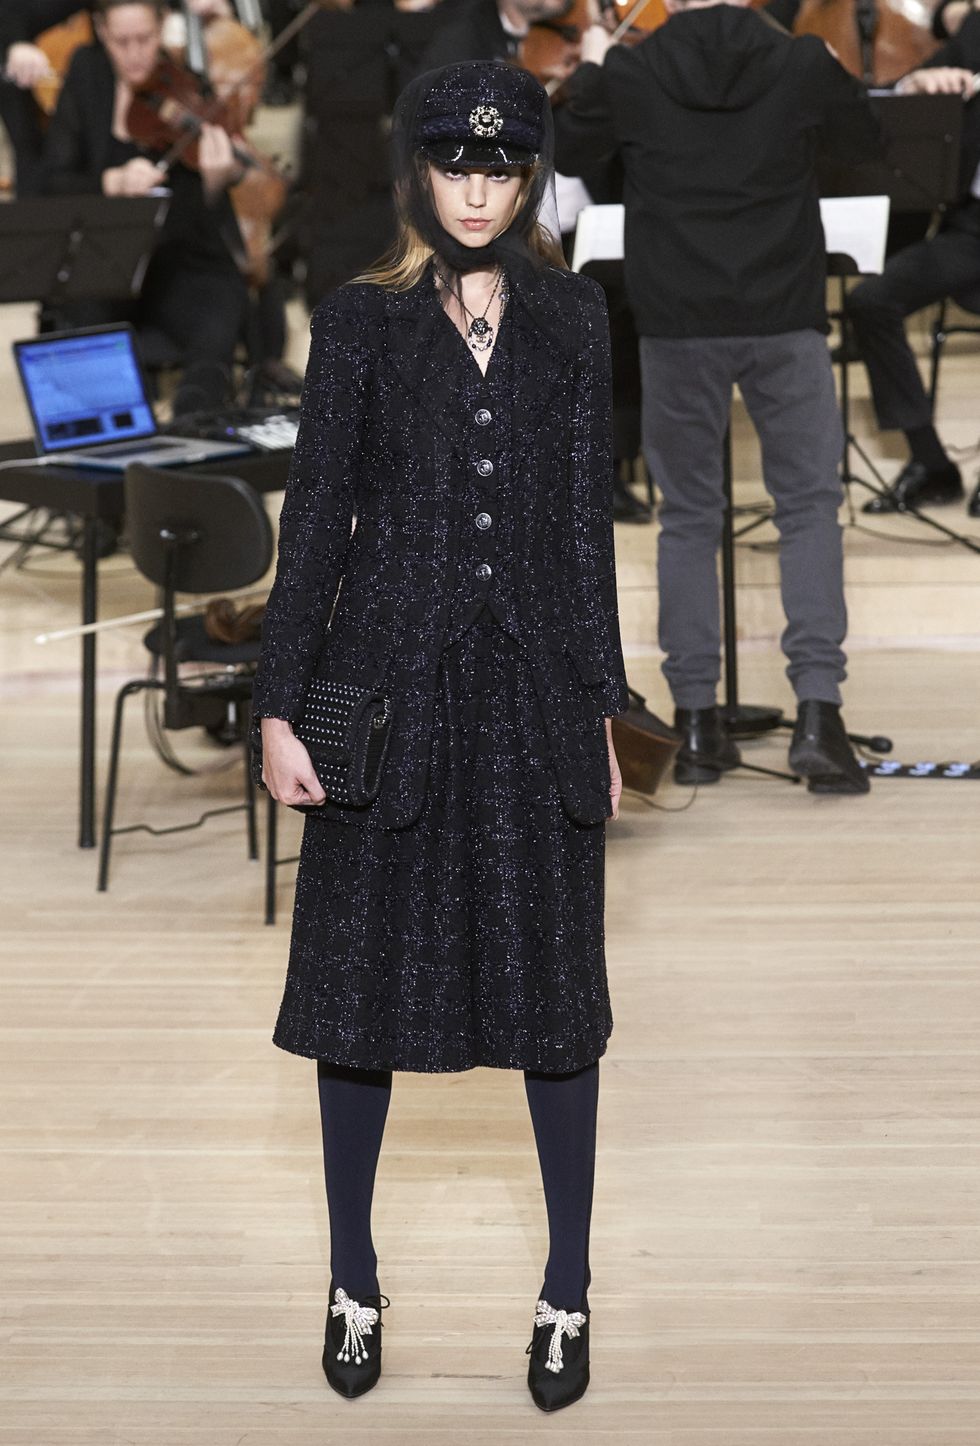 Chanel Pre Fall 2018 Métiers d'Art Collection Show in Hamburg (Chanel)